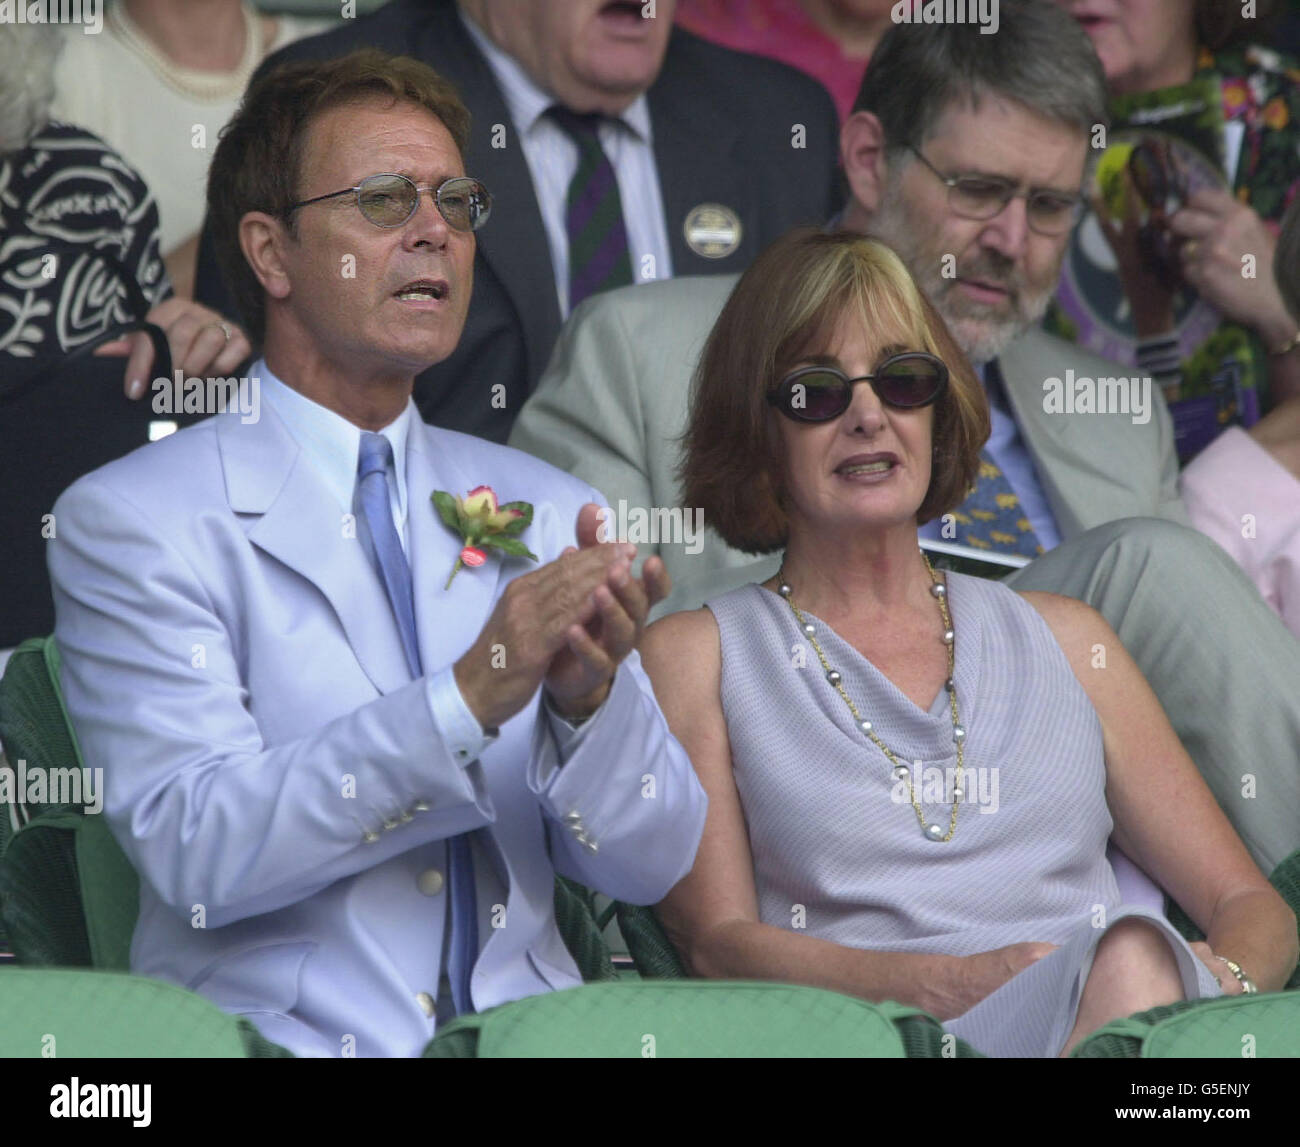 NO COMMERCIAL USE: Singer Sir Cliff Richard with guest Pat Farrar watch the Justine Henin of Belgium verses Jennifer Capriati of USA Semi Final match of the Lawn Tennis Championships at Wimbledon, London. Stock Photo